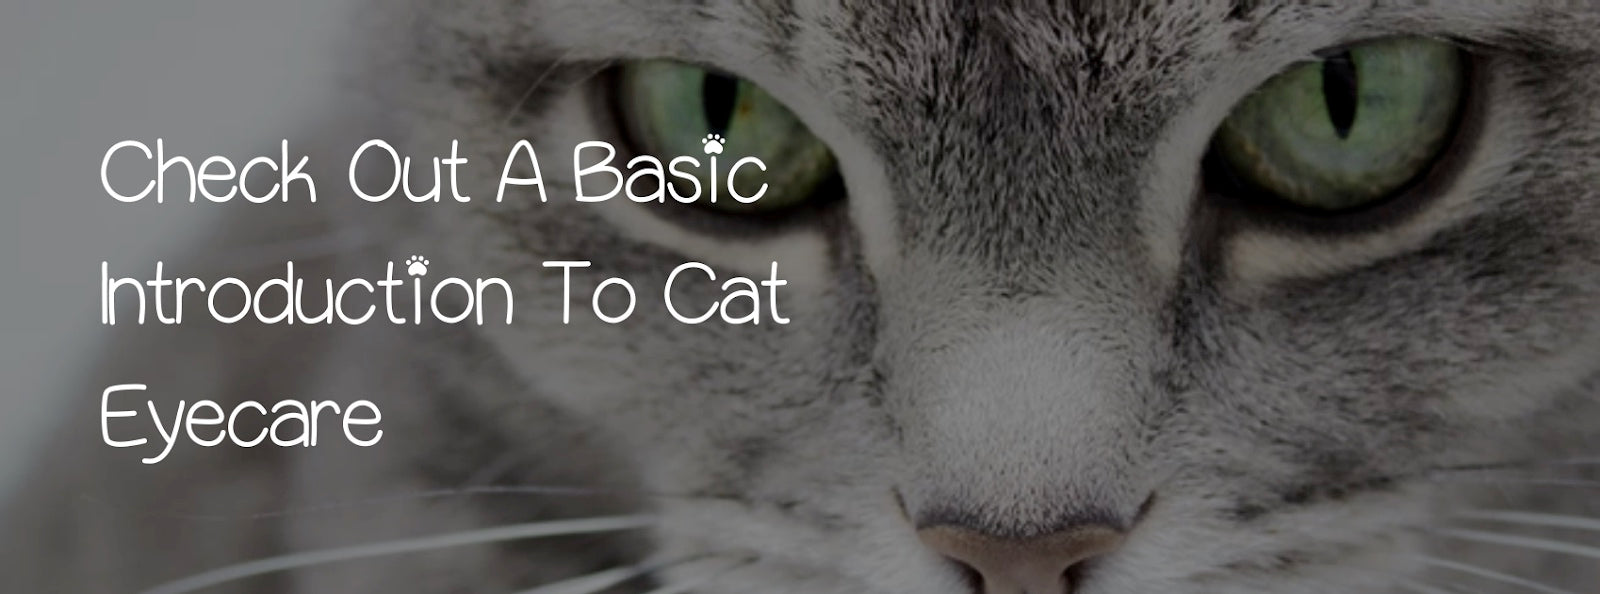 CHECK OUT A BASIC INTRODUCTION TO CAT EYECARE